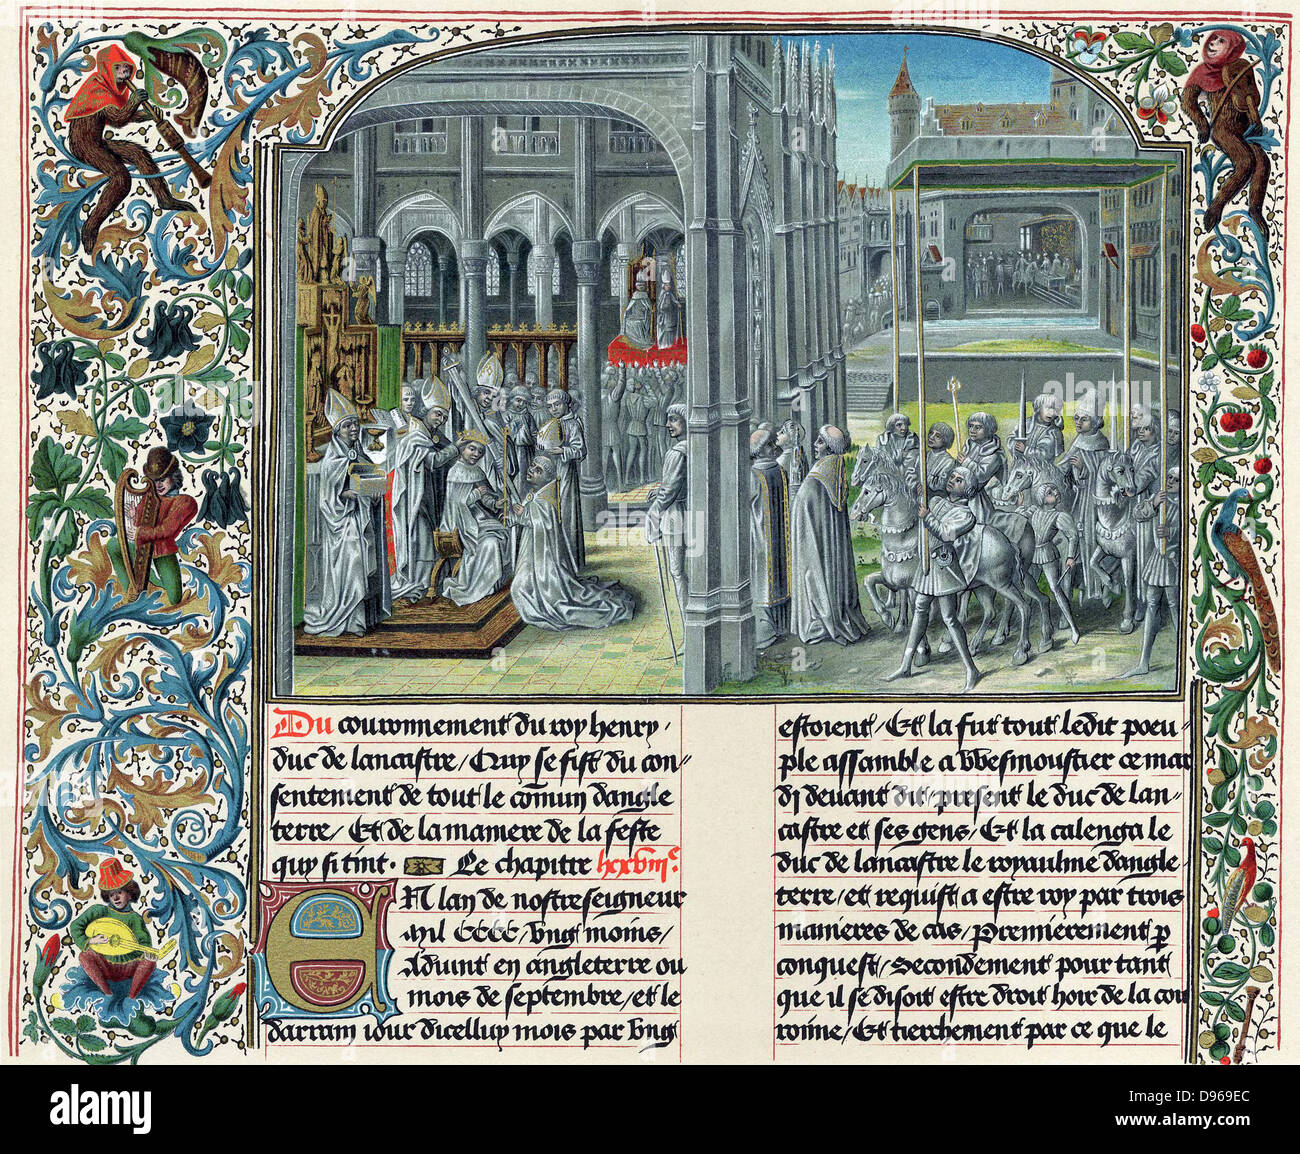 Henry IV (1367-1413) First Lancastrian king of England from 1399; son of John of Gaunt, known as Henry Bolingbroke from birthplace in Lincolnshire. Coronation at Westminster. Men play musical instruments in borders illuminated with foliage, flowers and birds. After 15th century manuscript of Froissart Stock Photo